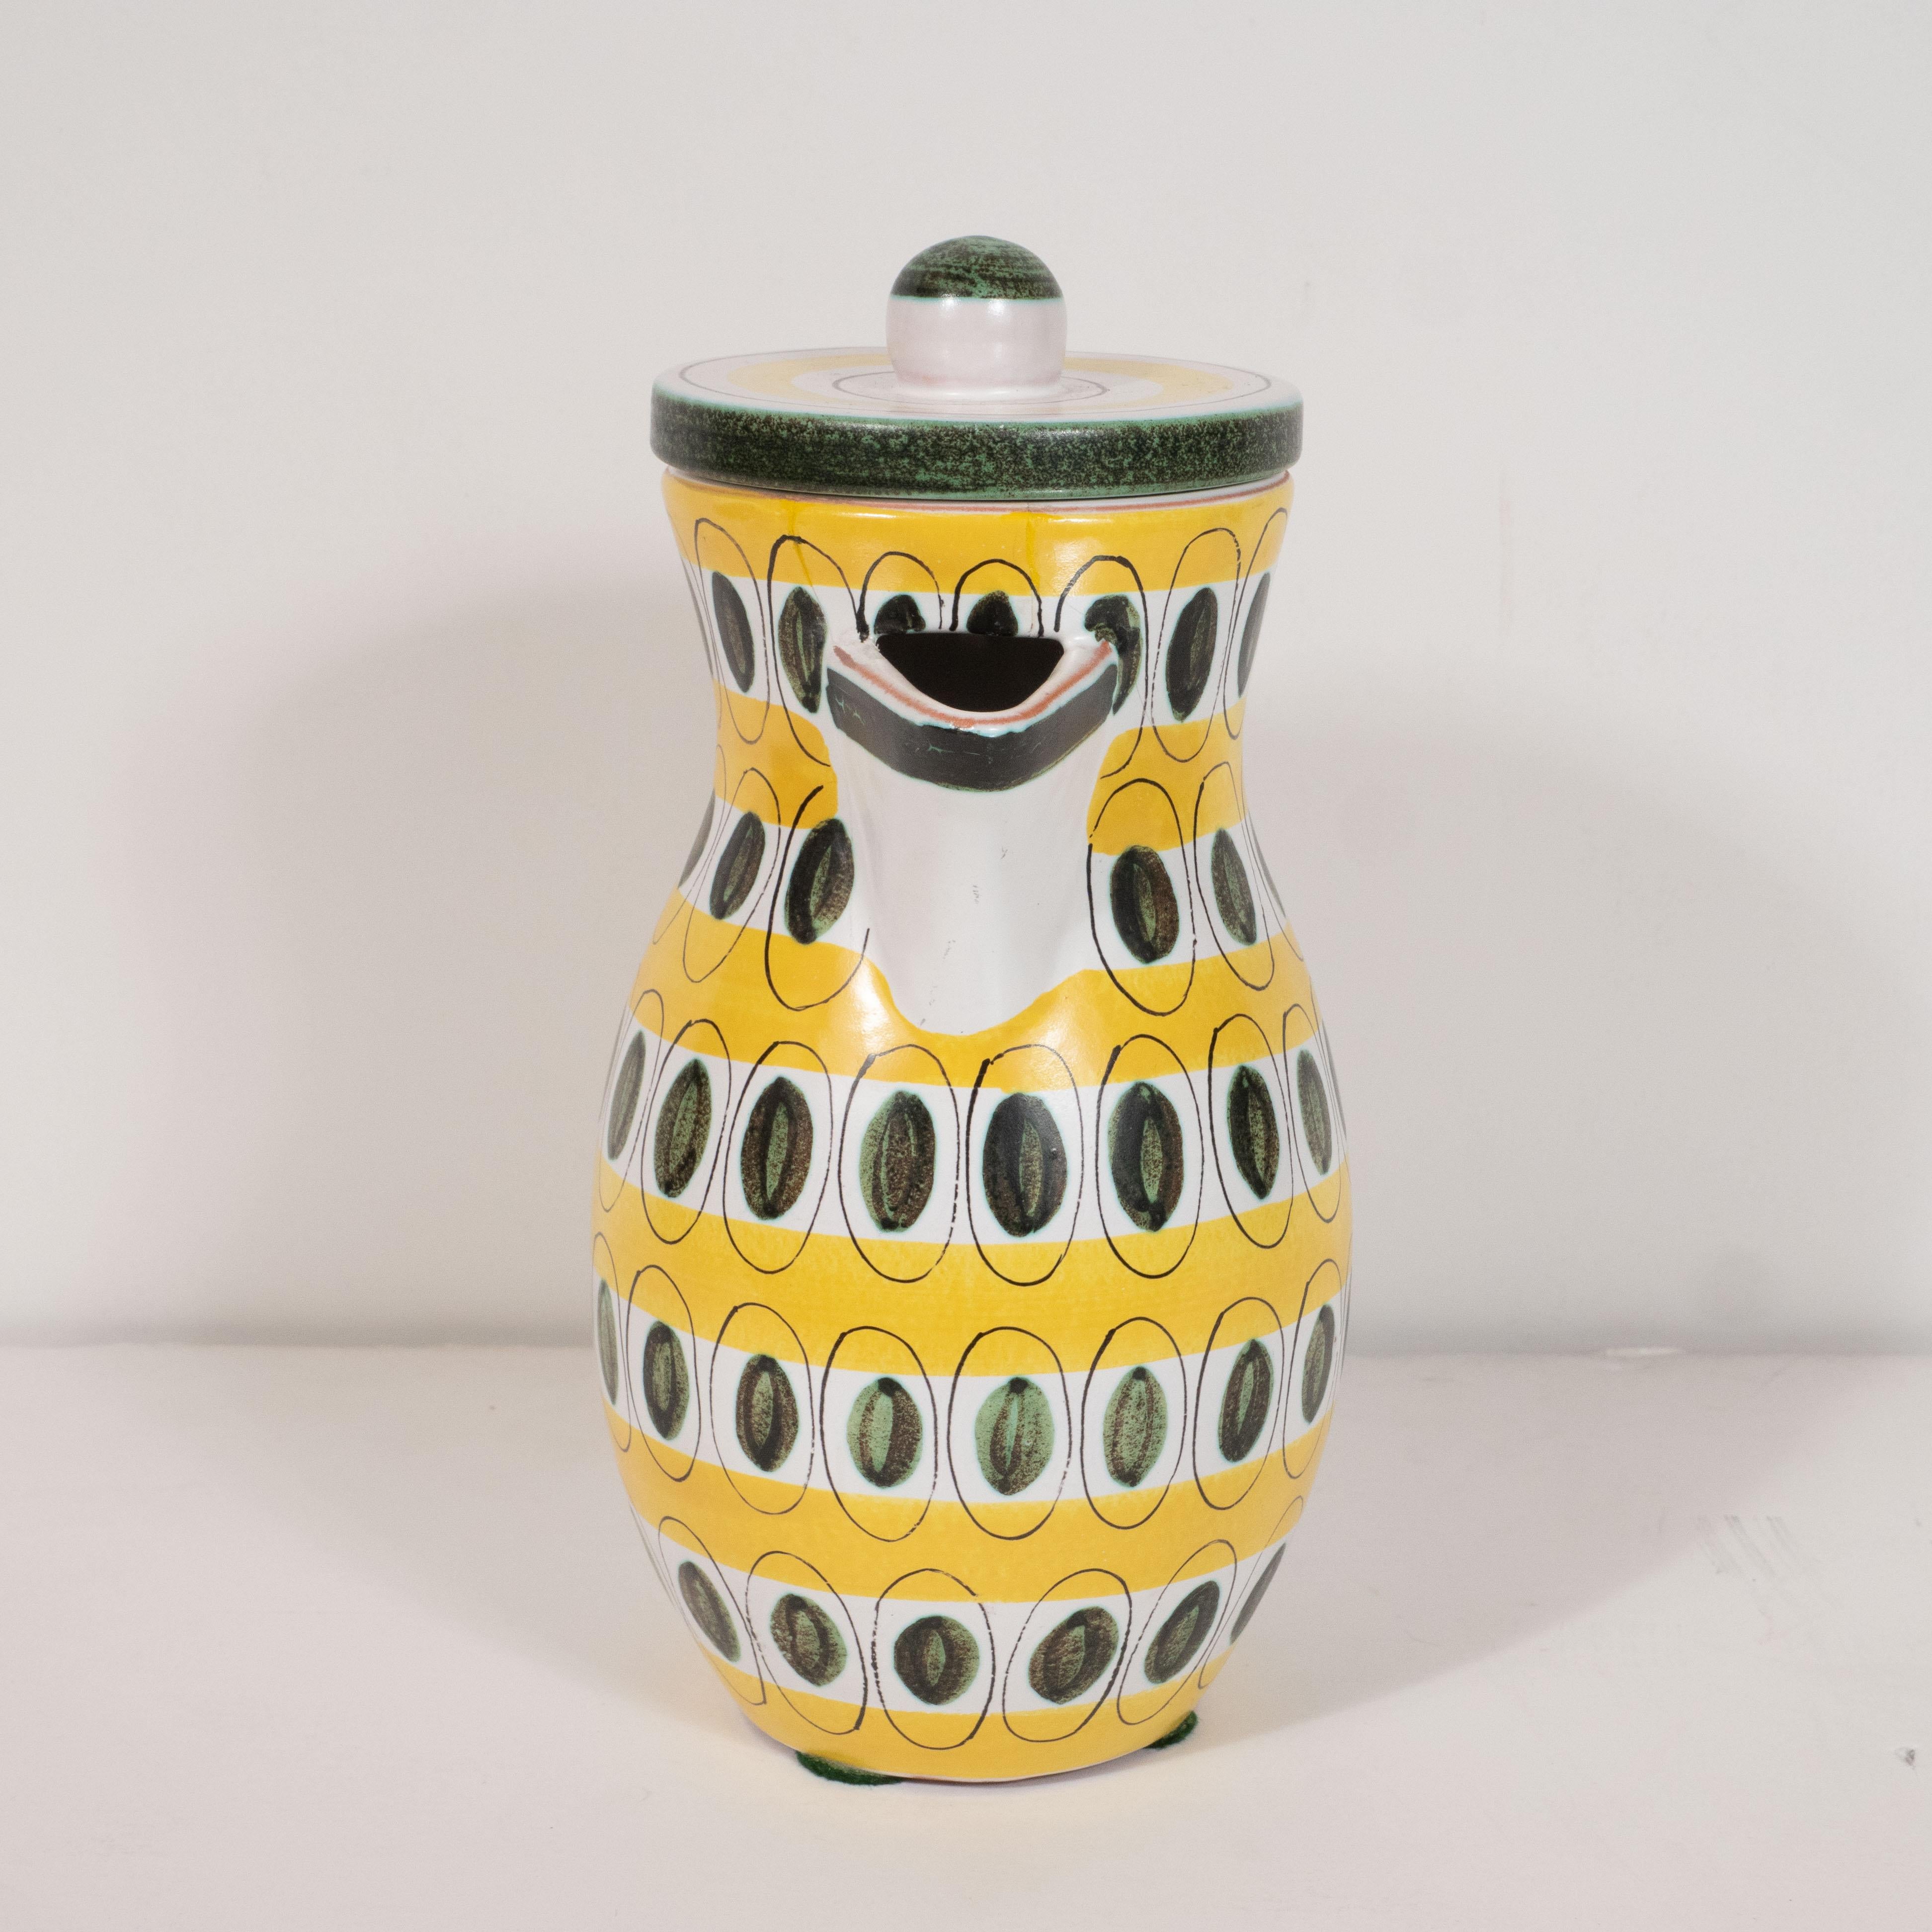 This fun and sophisticated pitcher was realized by the celebrated pottery studio Stig Lindberg in Sweden, circa 1960. It features a white undulating body hand painted with sunflower yellow bands and ovoid hunter green dots (resembling martini